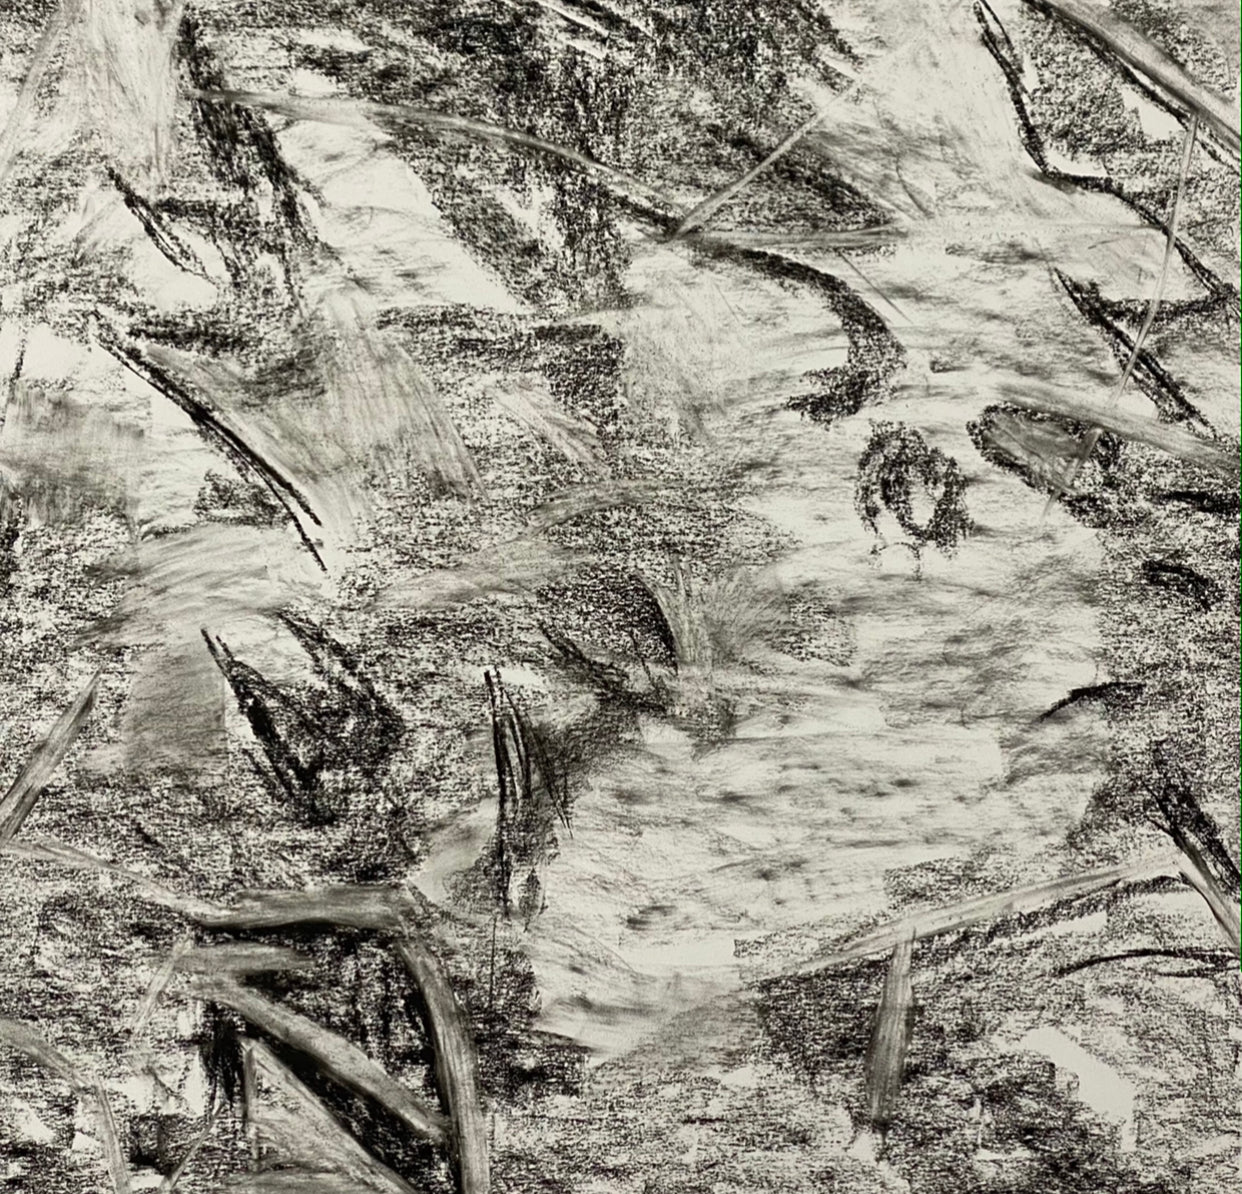 Juanita Bellavance, Some simple dirt concept drawing, From the Chestatee River portfolio, 2021, Charcoal on paper, 24 x 24 inches.